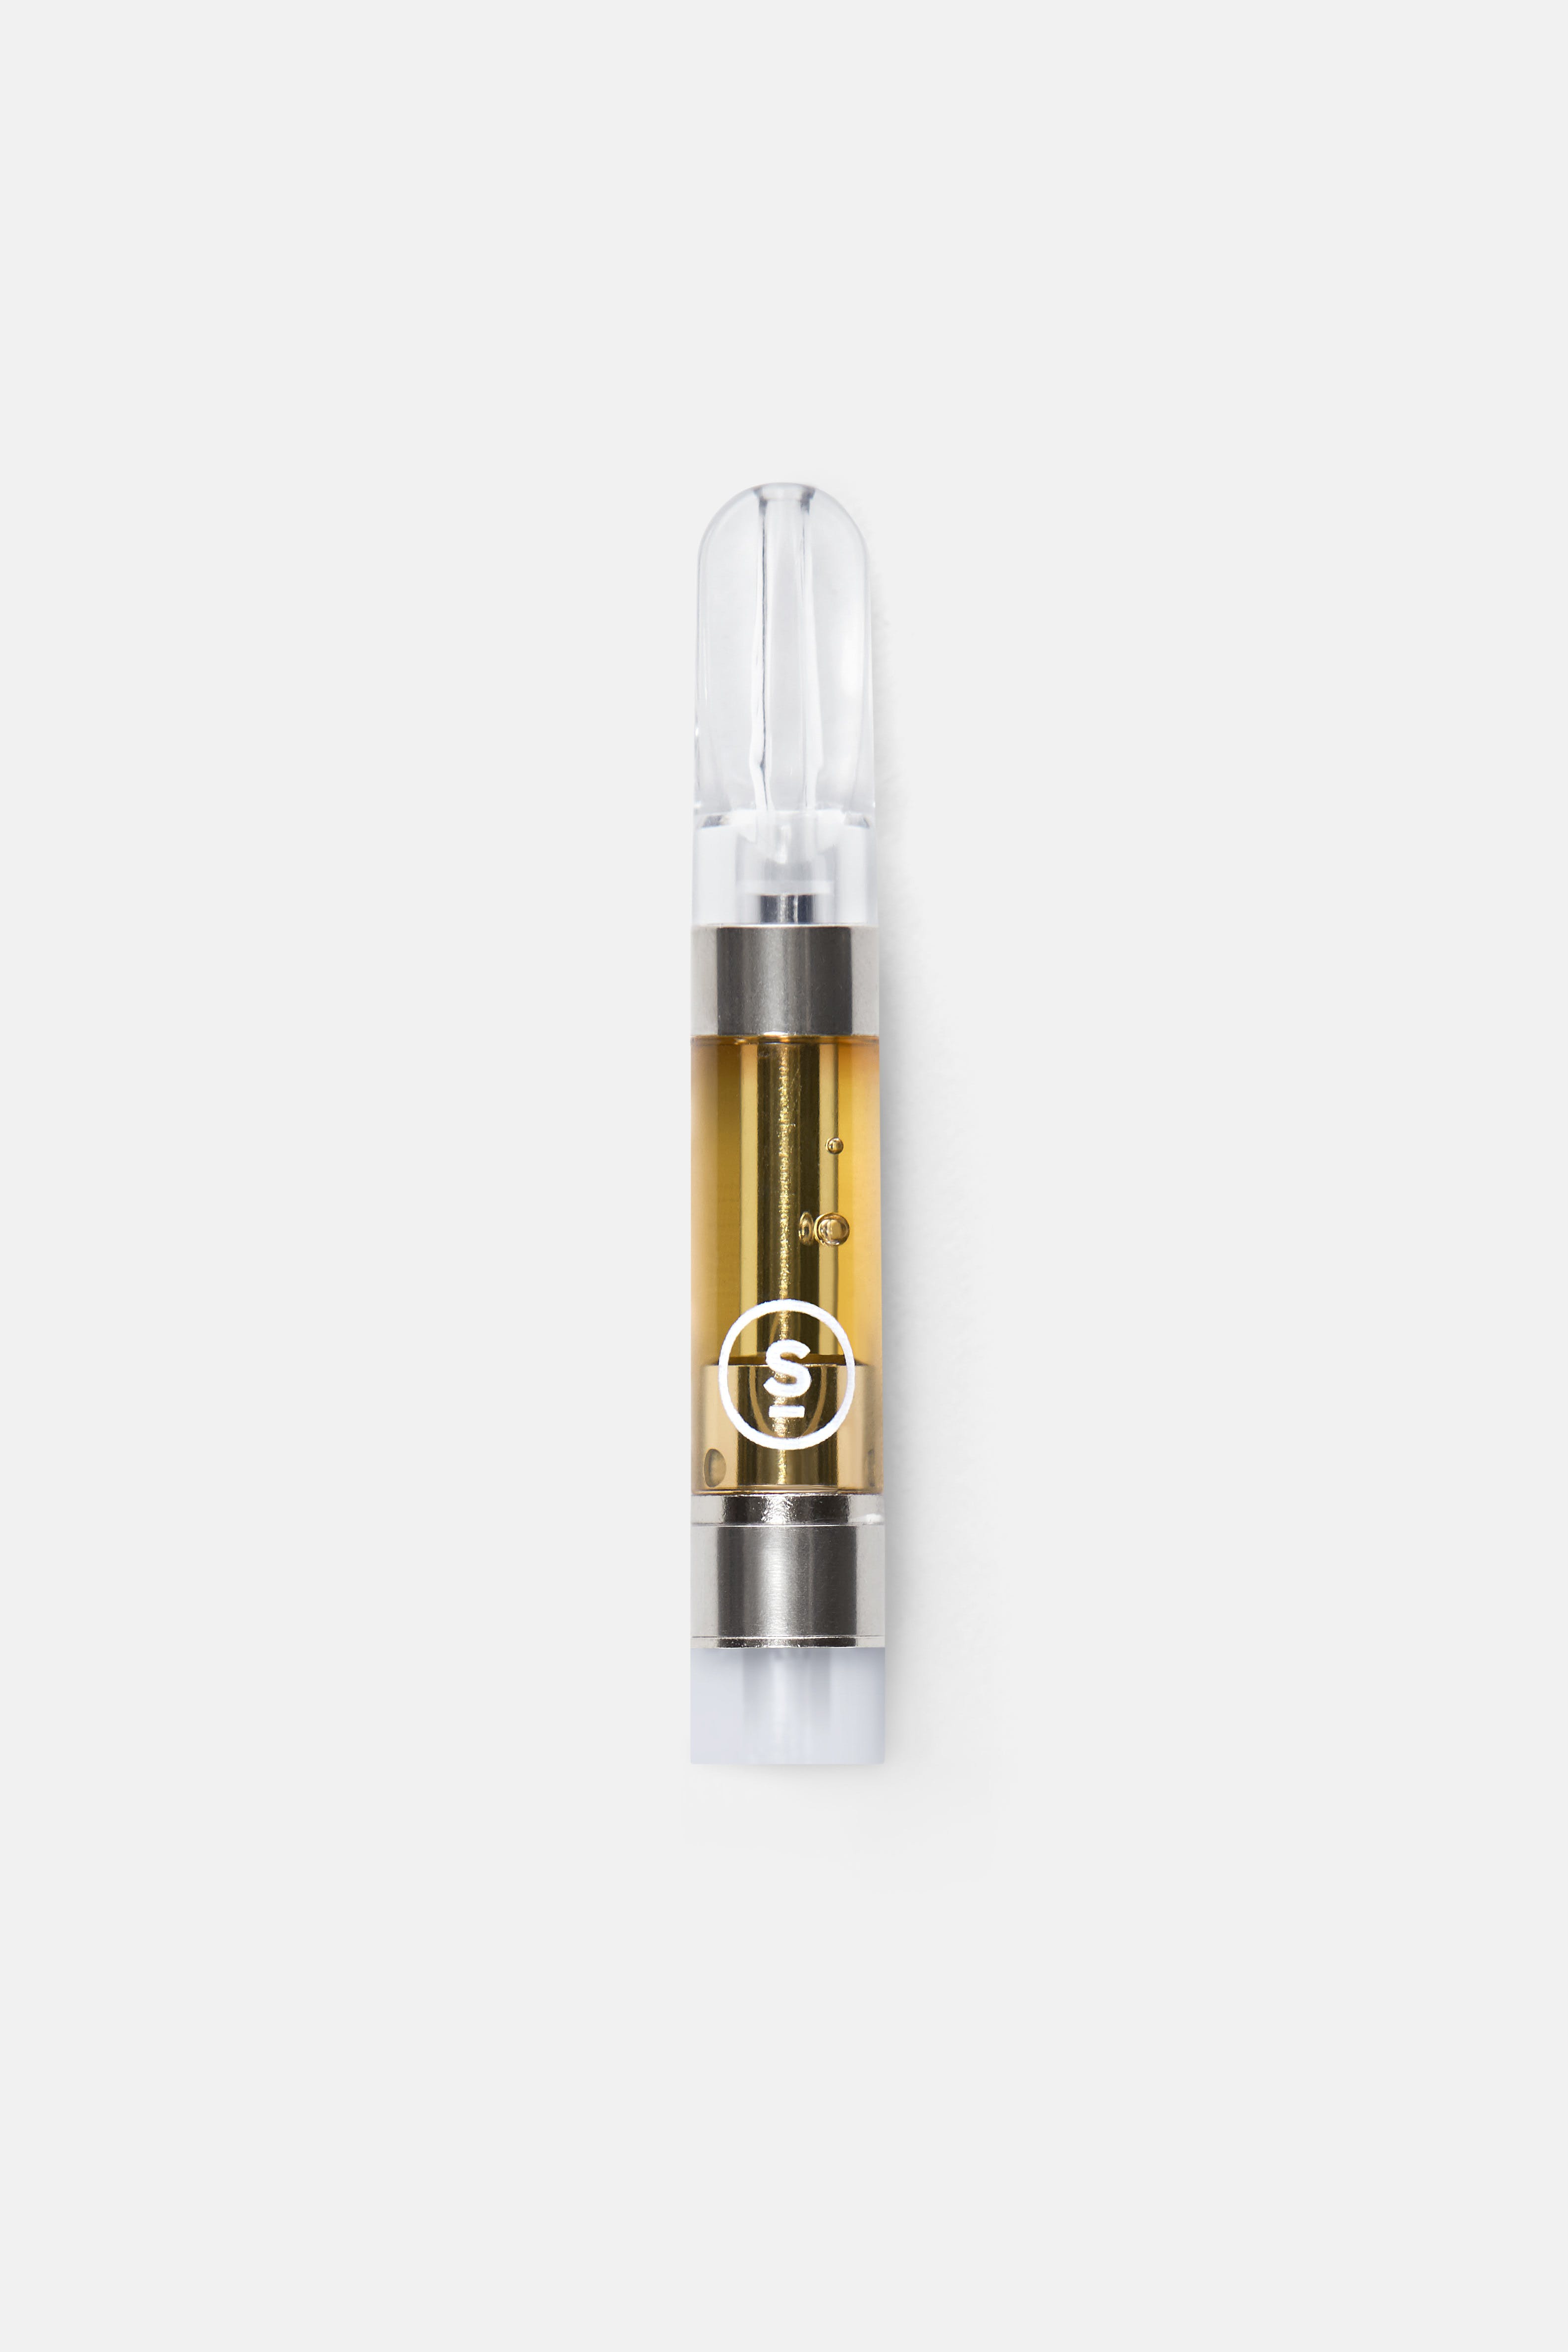 concentrate-select-elite-thc-cartridges-northern-lights-cartridge-1000mg